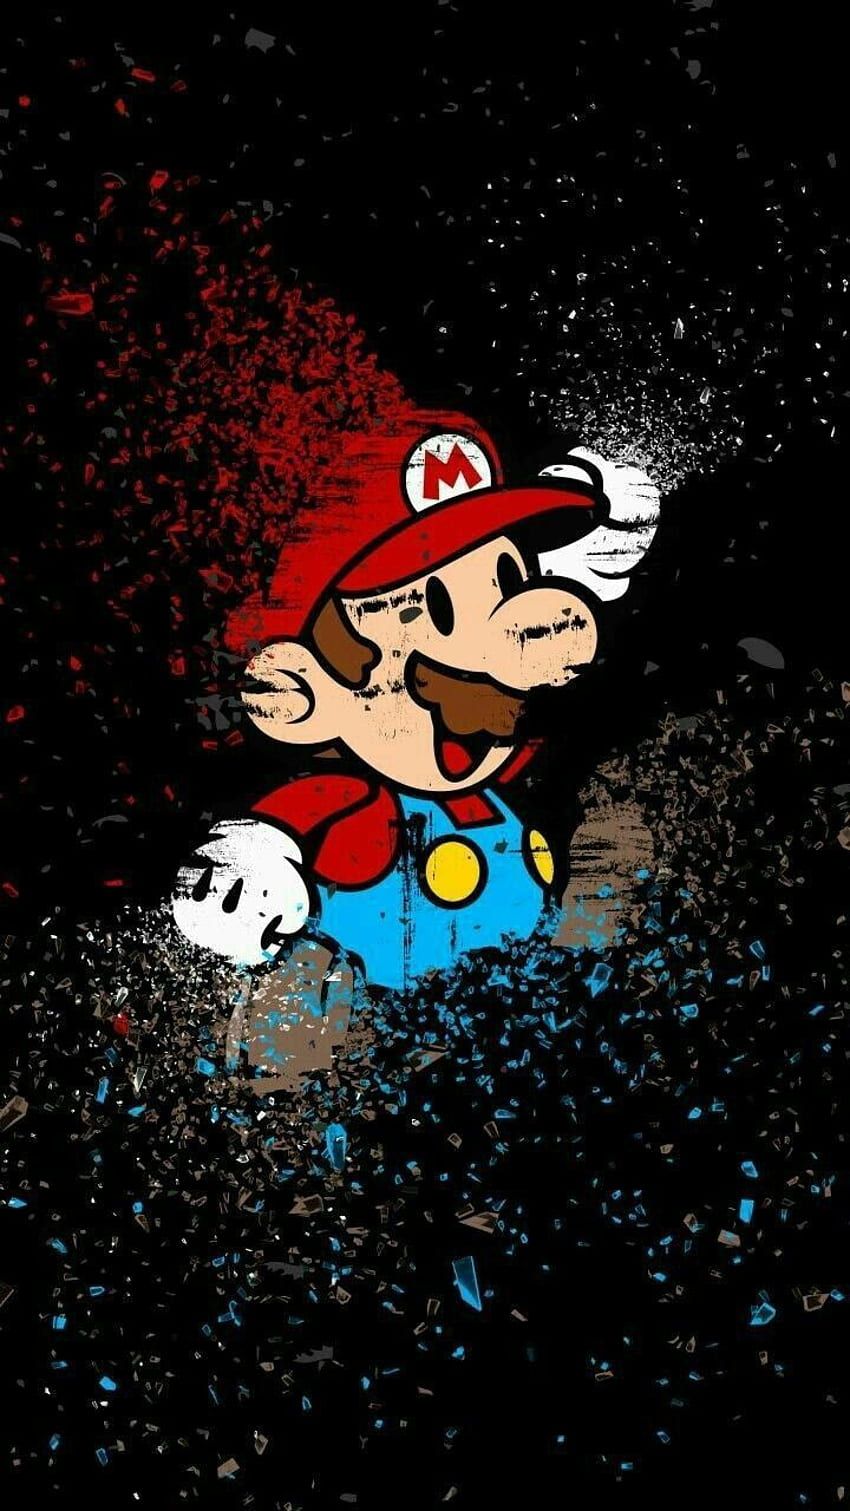 The image of a mario character in black and red paint - 